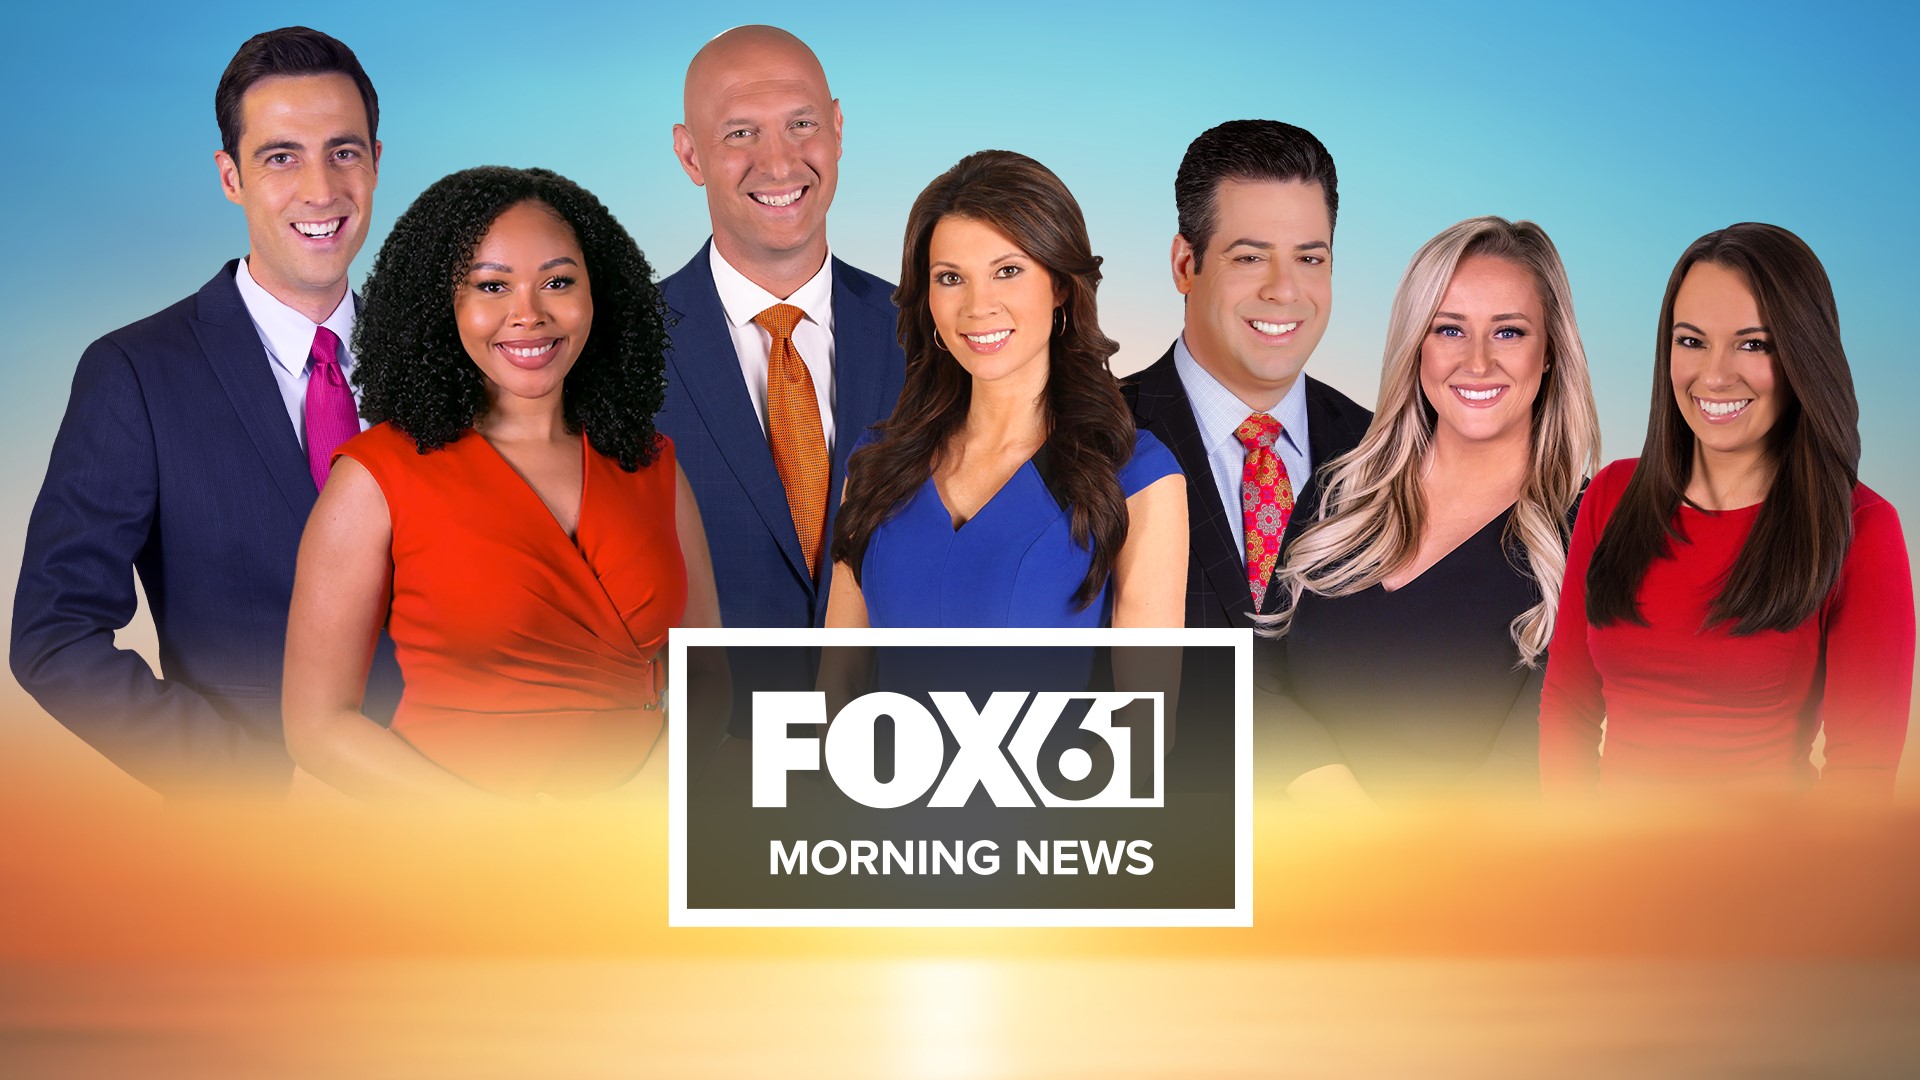 The only All Local All Morning newscast in Connecticut. Overnight developments, breaking news, local weather and traffic from across the state every weekday morning.